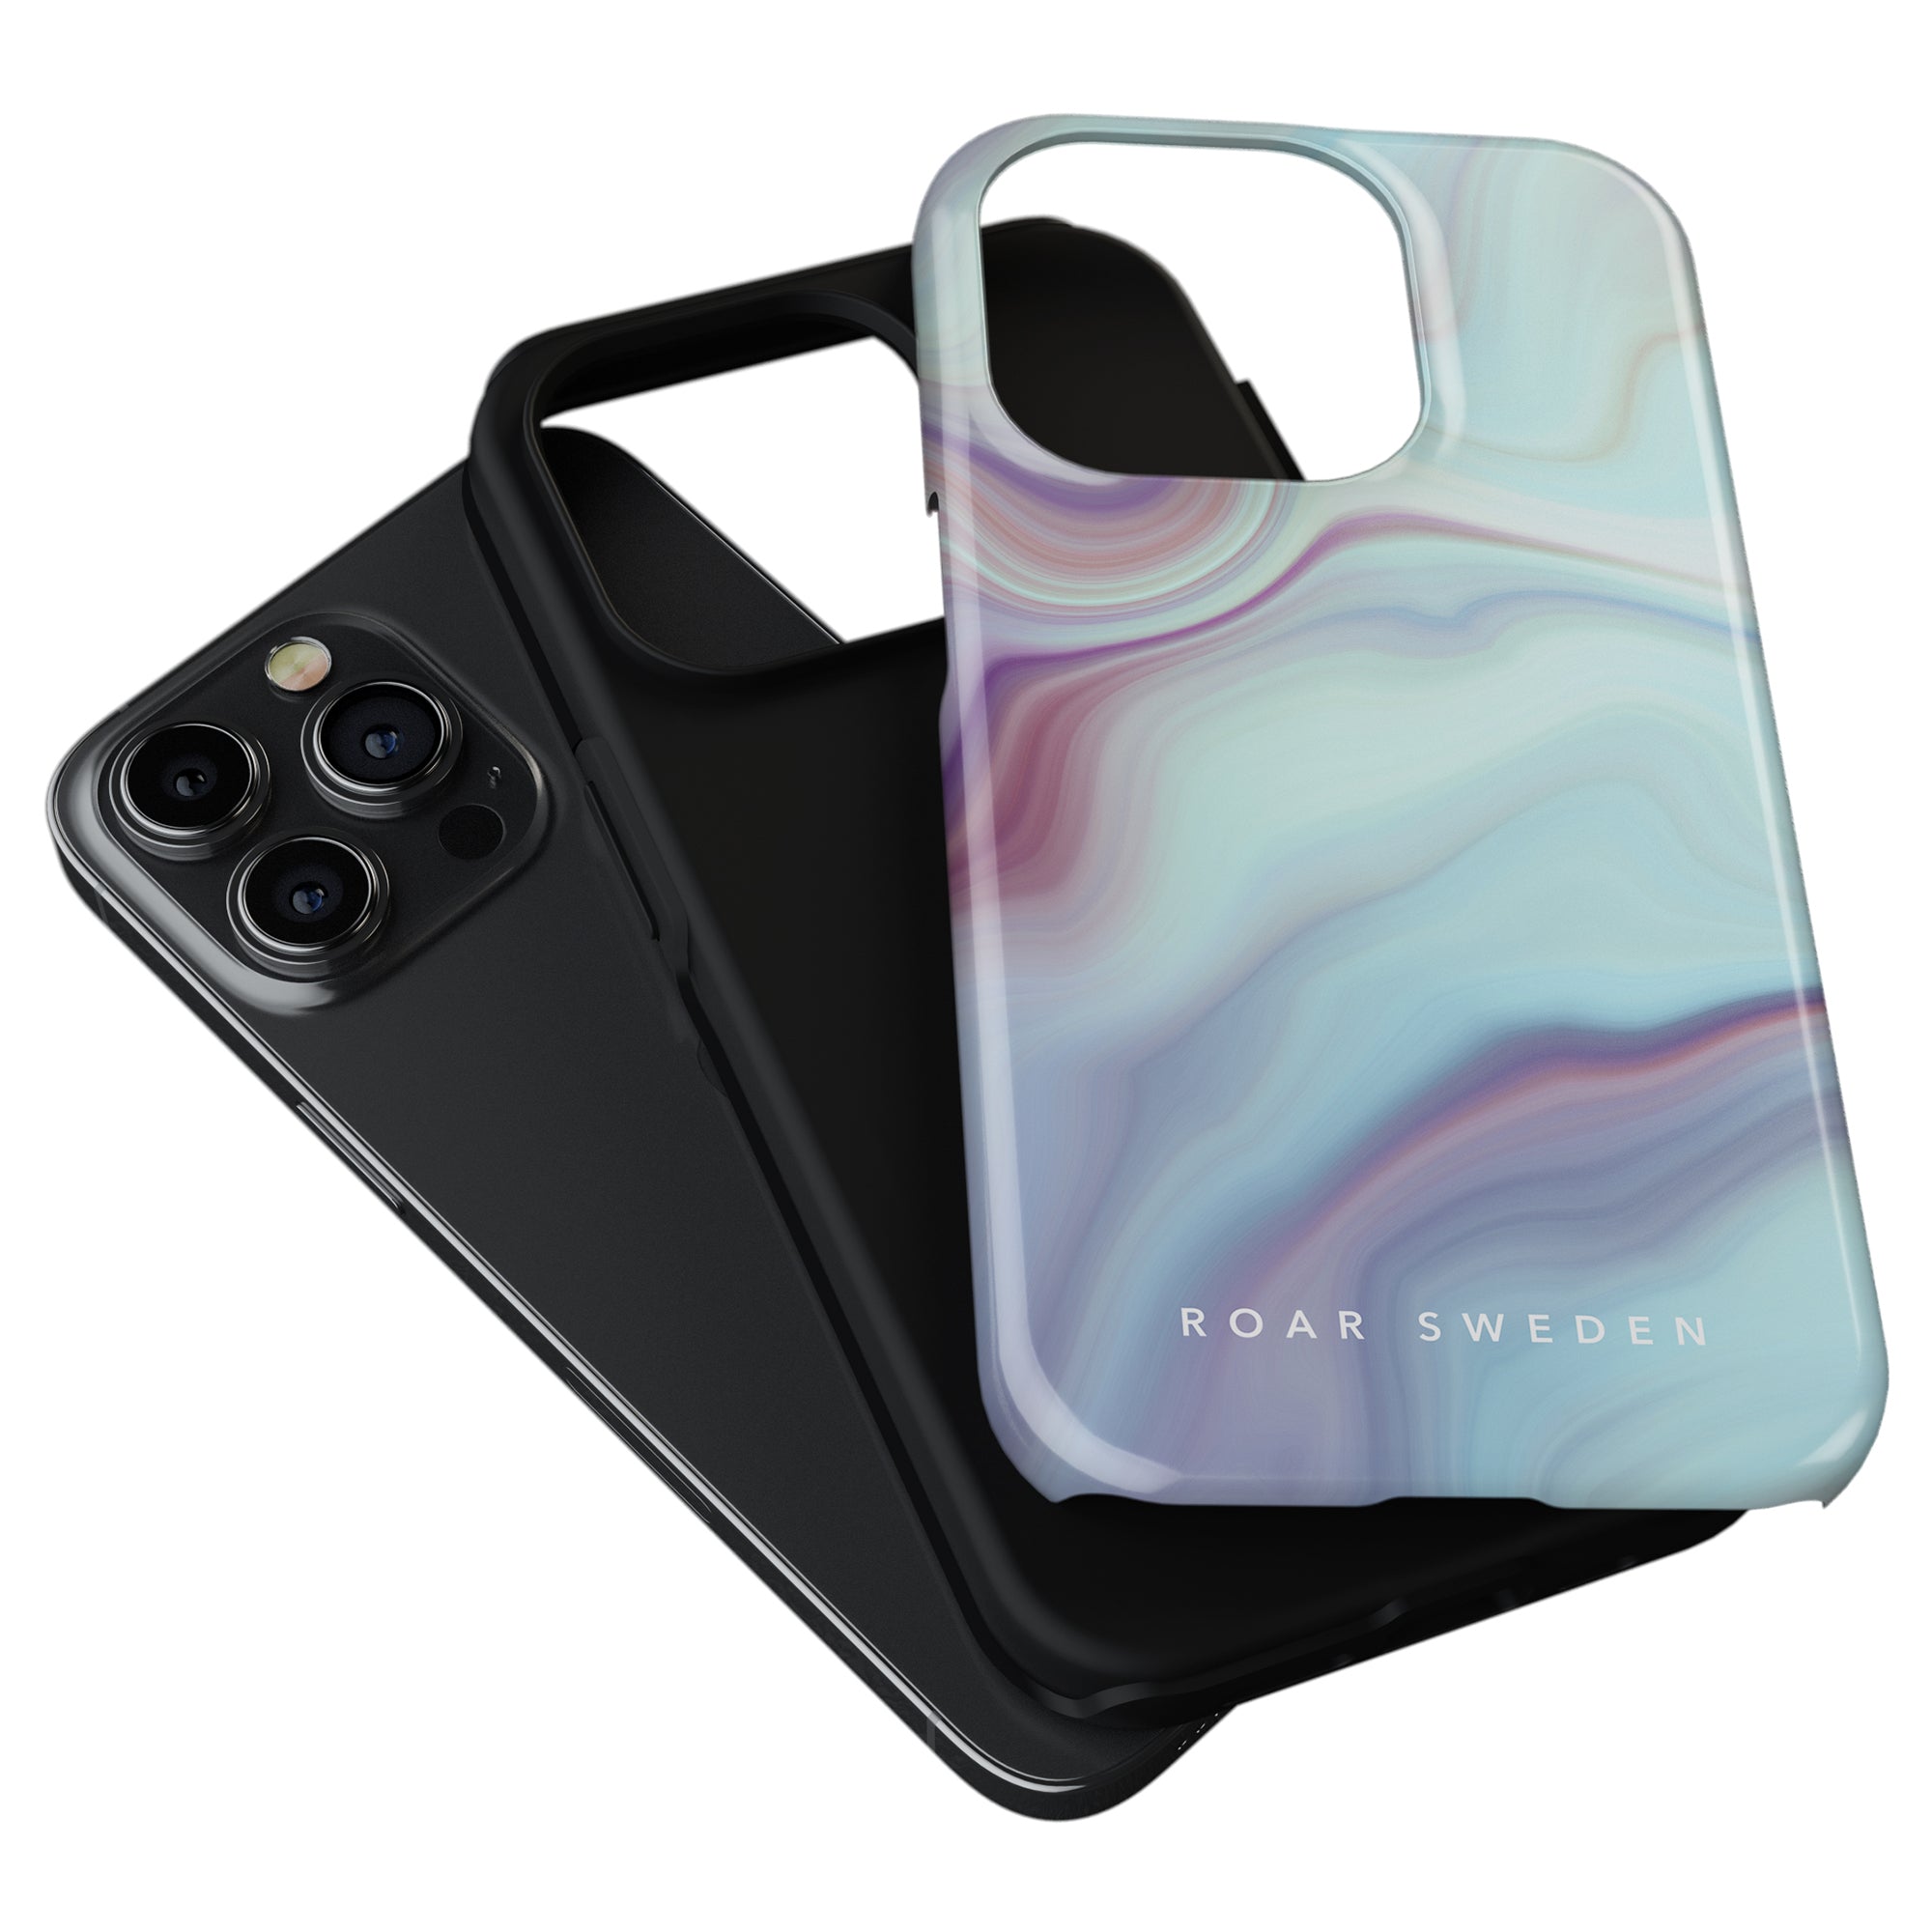 Two smartphones, one with a black case and another with an Abalone - Tough Case from the Oyster Collection, positioned side by side on a white background.